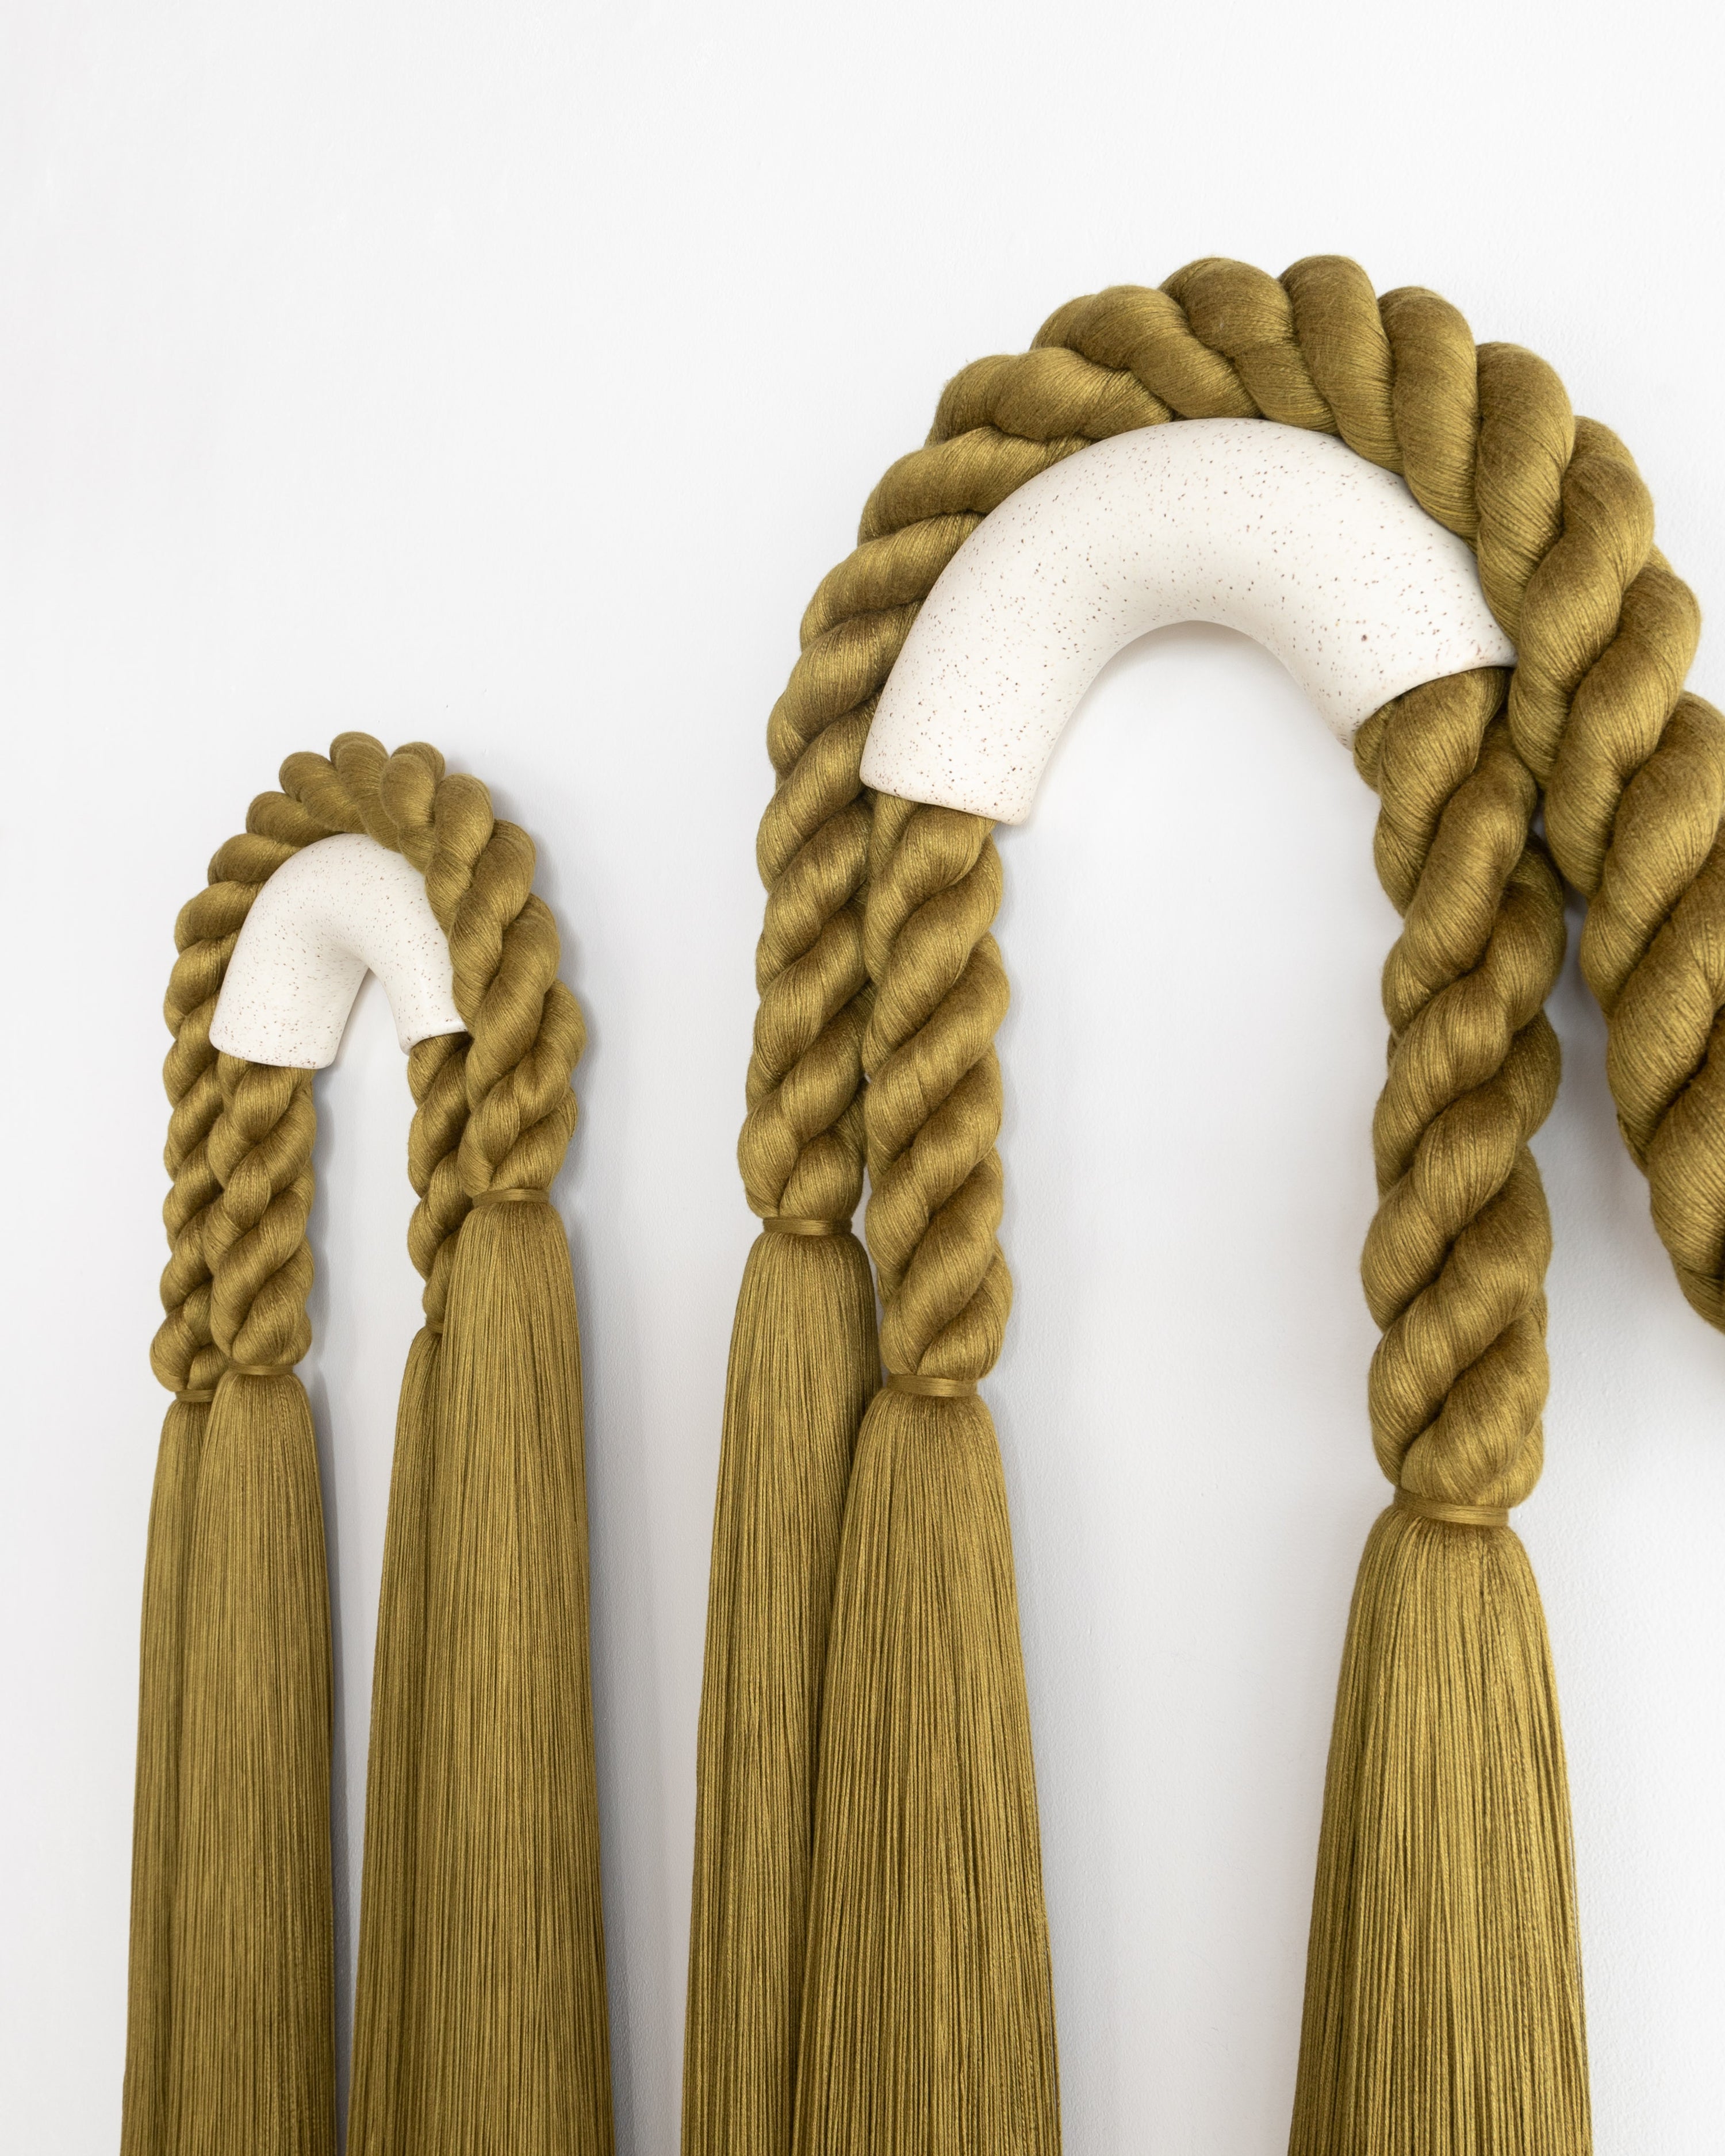 Large Off-White Ceramic Archway Series (Olive Rope)